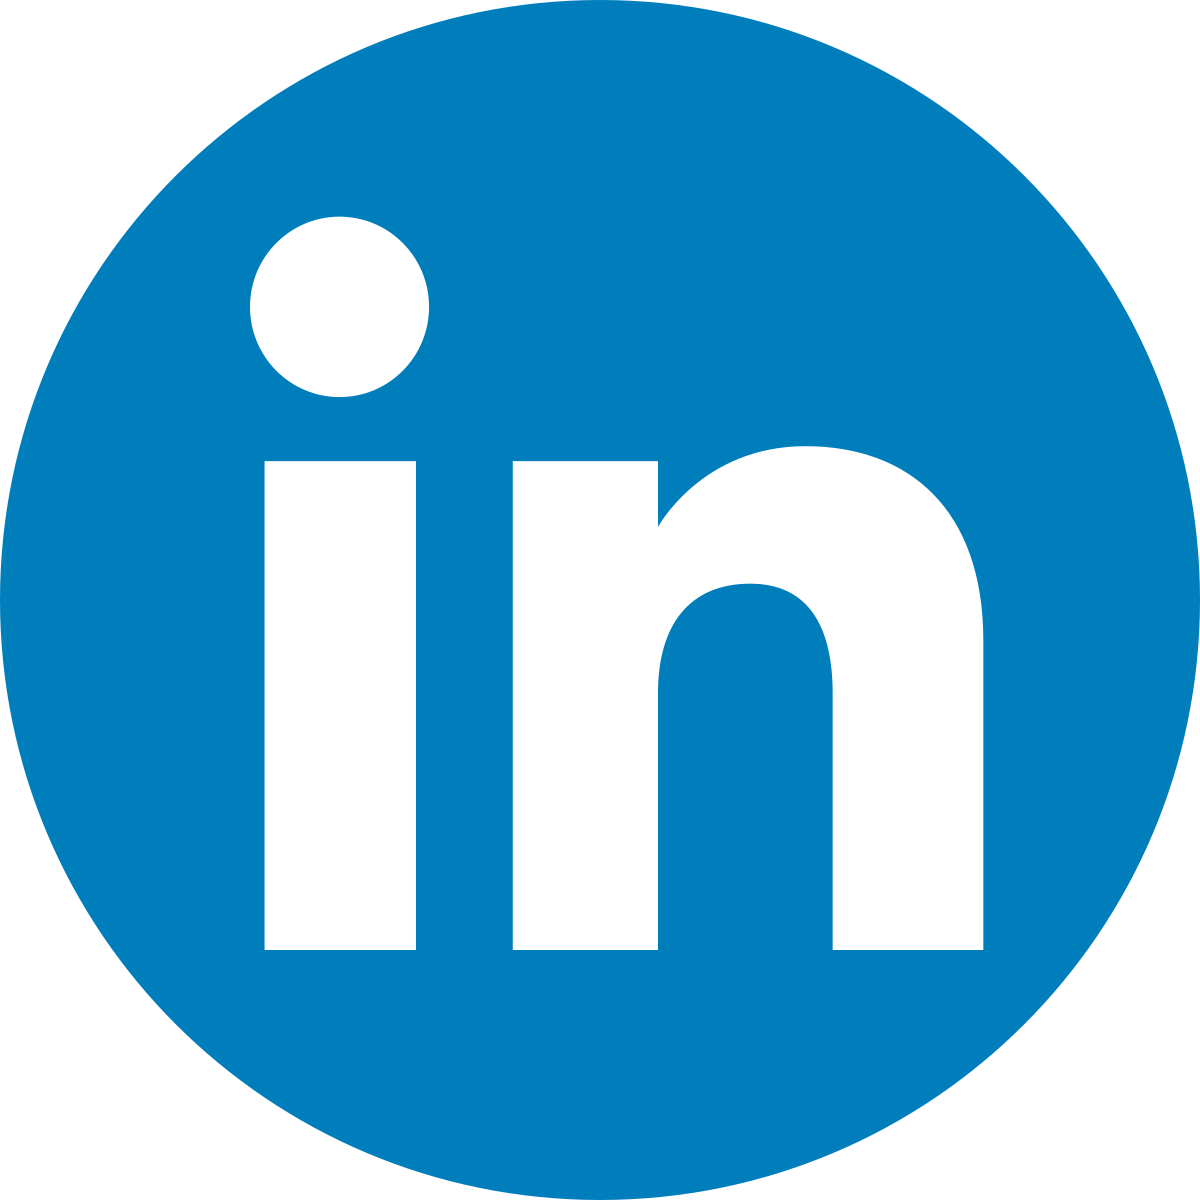 Blue circle with "in" inside signifying the logo for LinkedIn